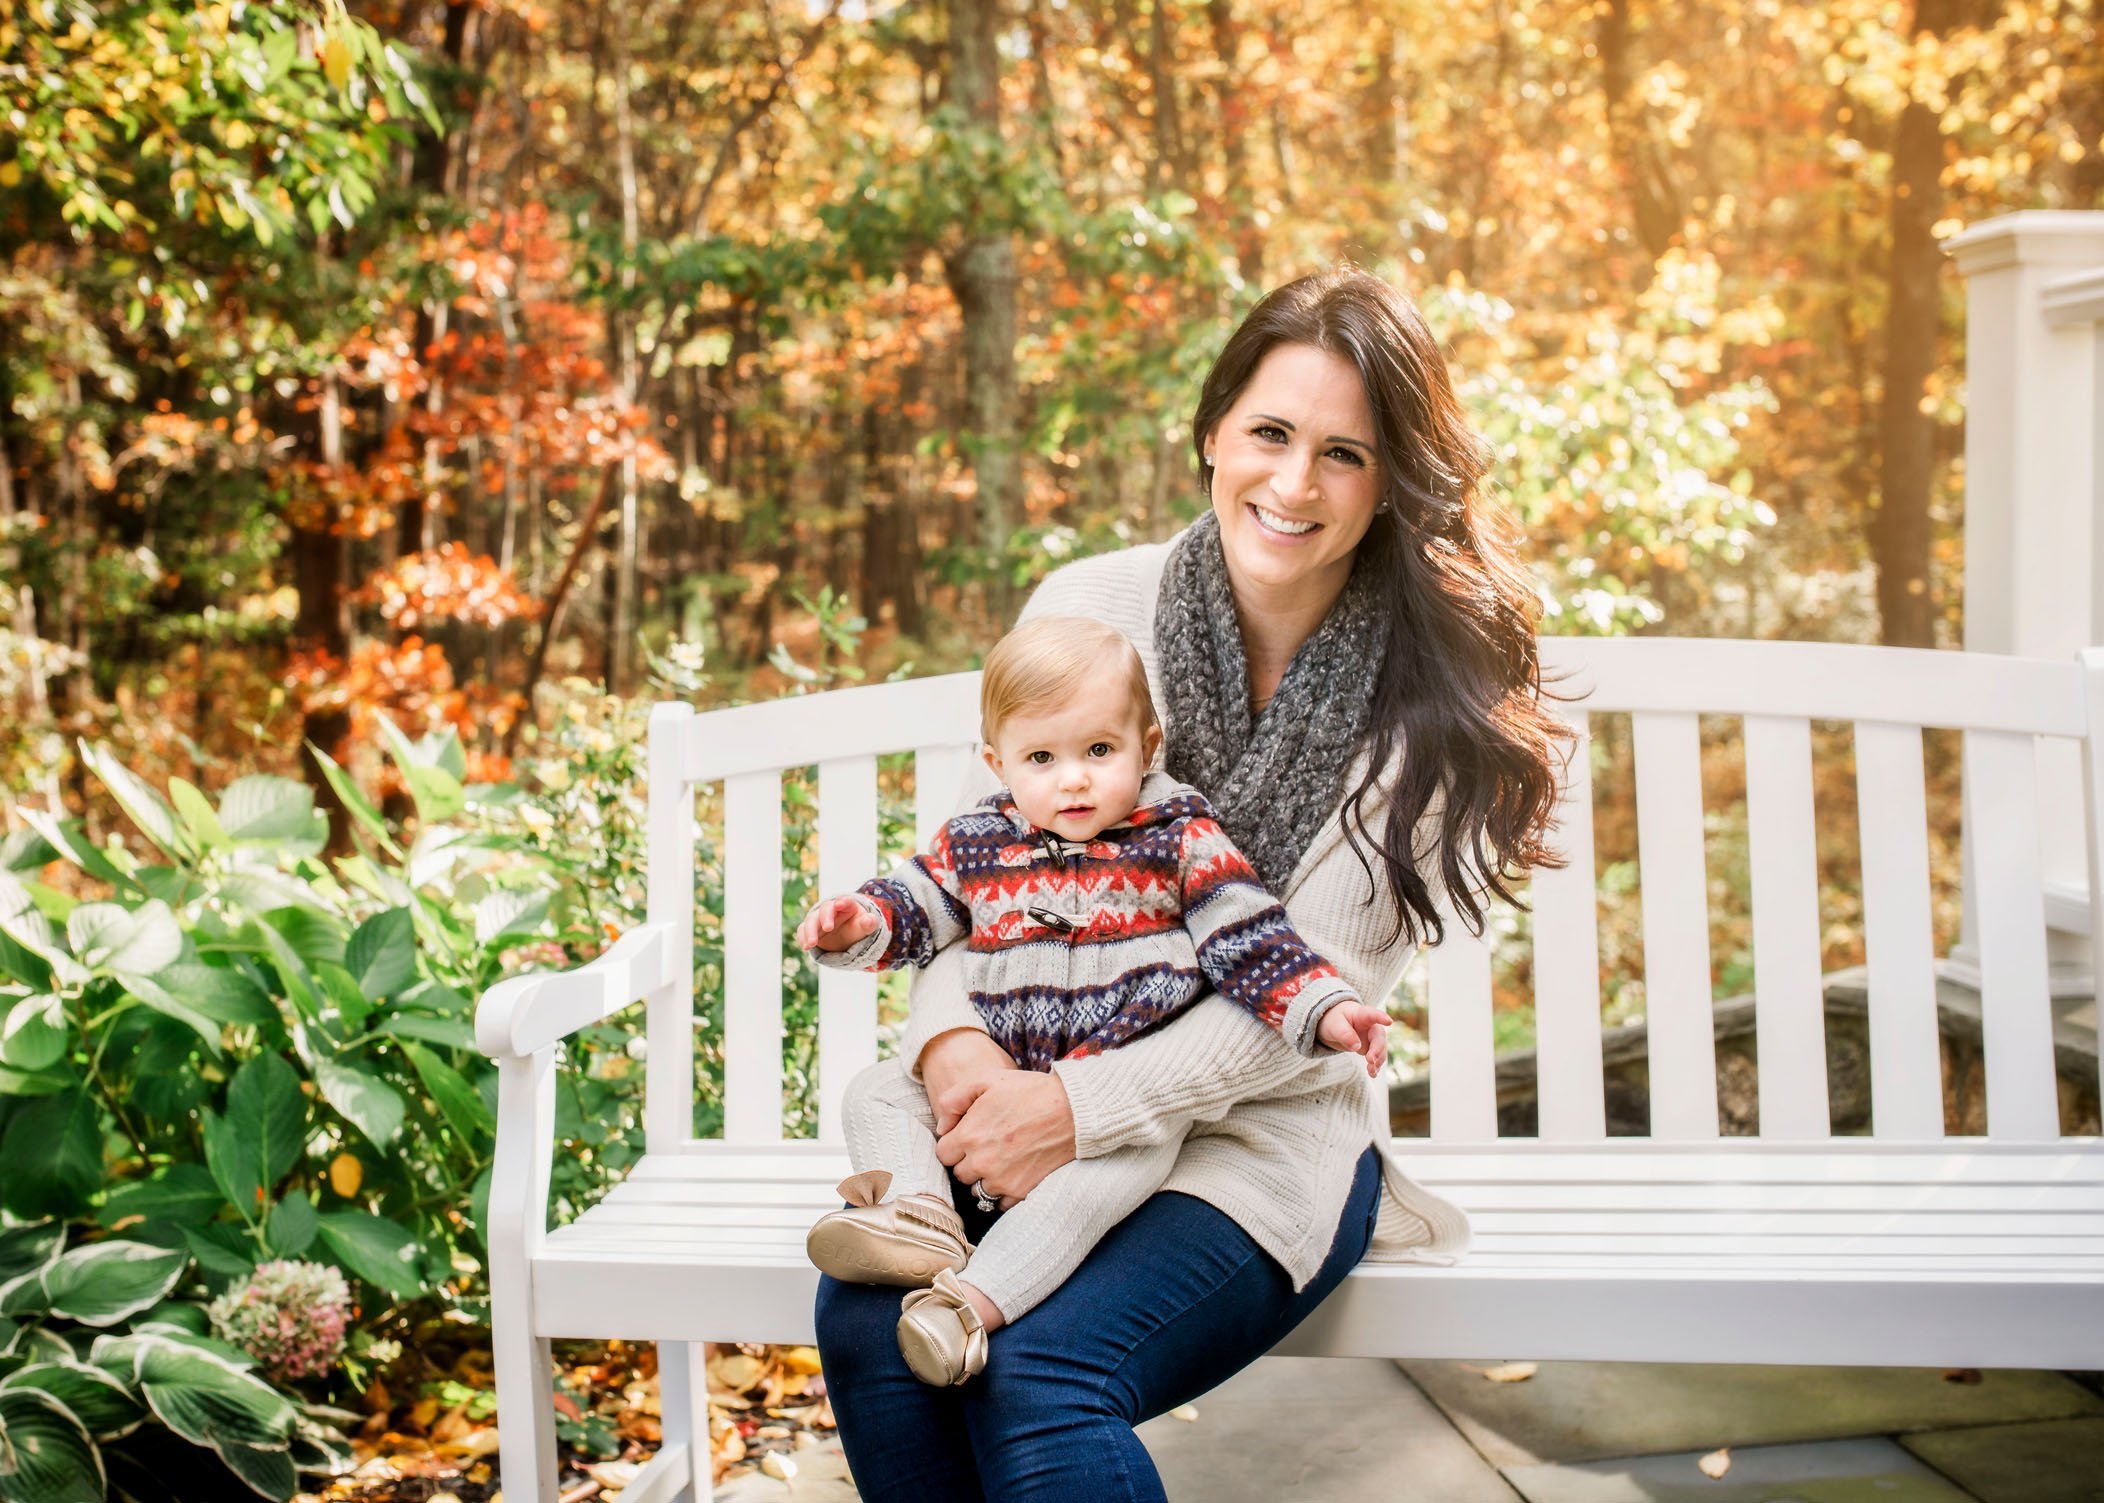 Mom holds 1 year old daughter on lap on bench outside in fall